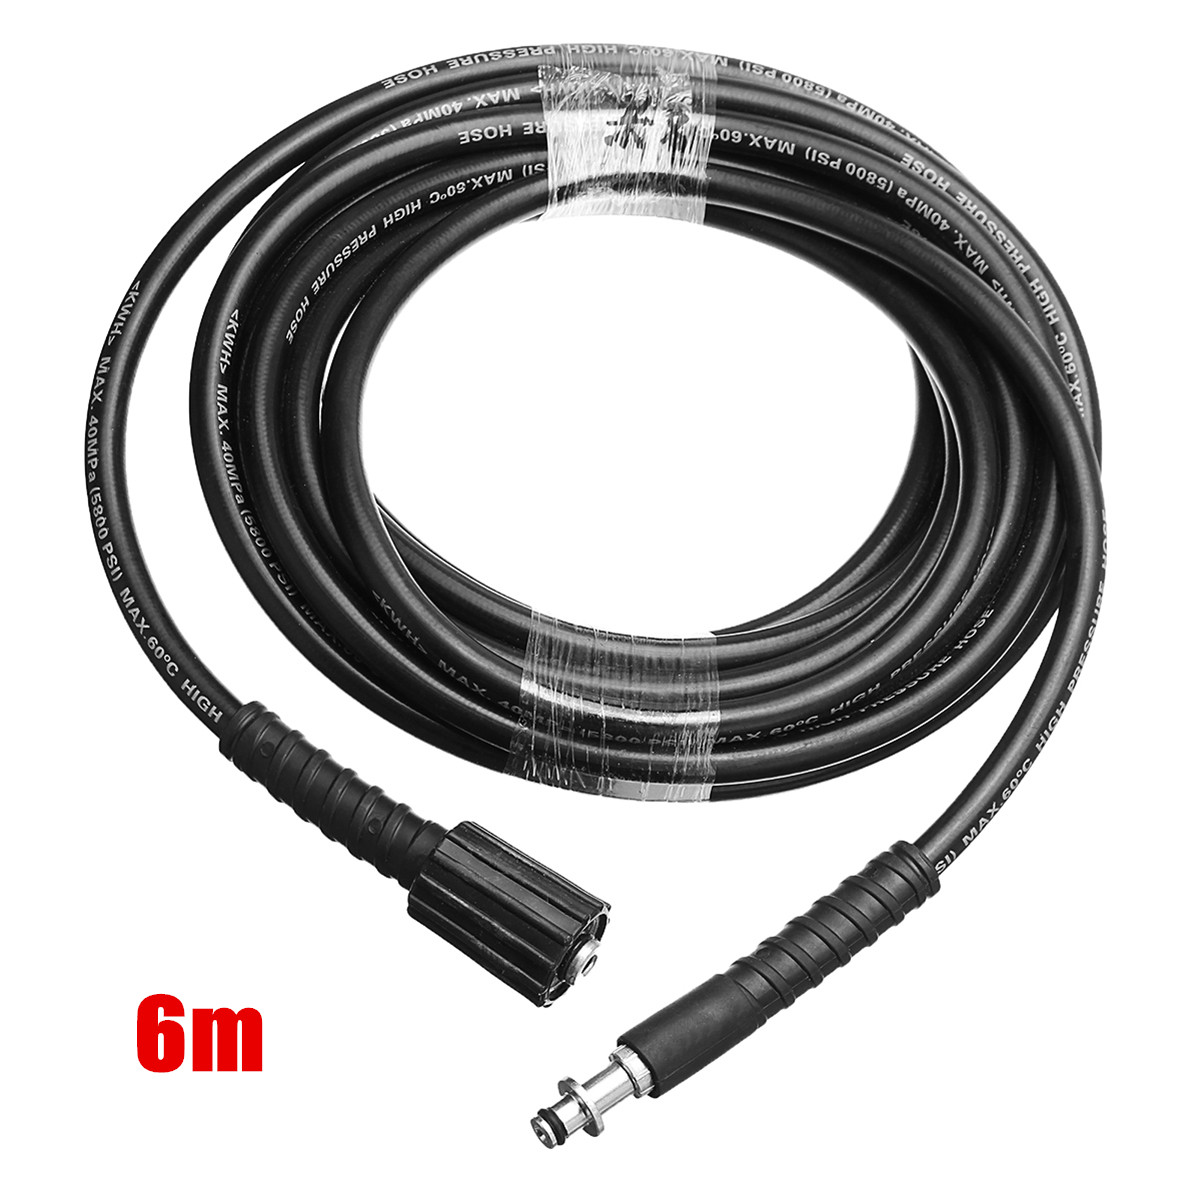 Dandelionsky 10M High Pressure Replacement Hose Cleaning Kit High Pressure Washers Water Cleaning Hose Click Type Plug Quick Connect System Pressure Washer for Karcher K2 K3 K4 K5 